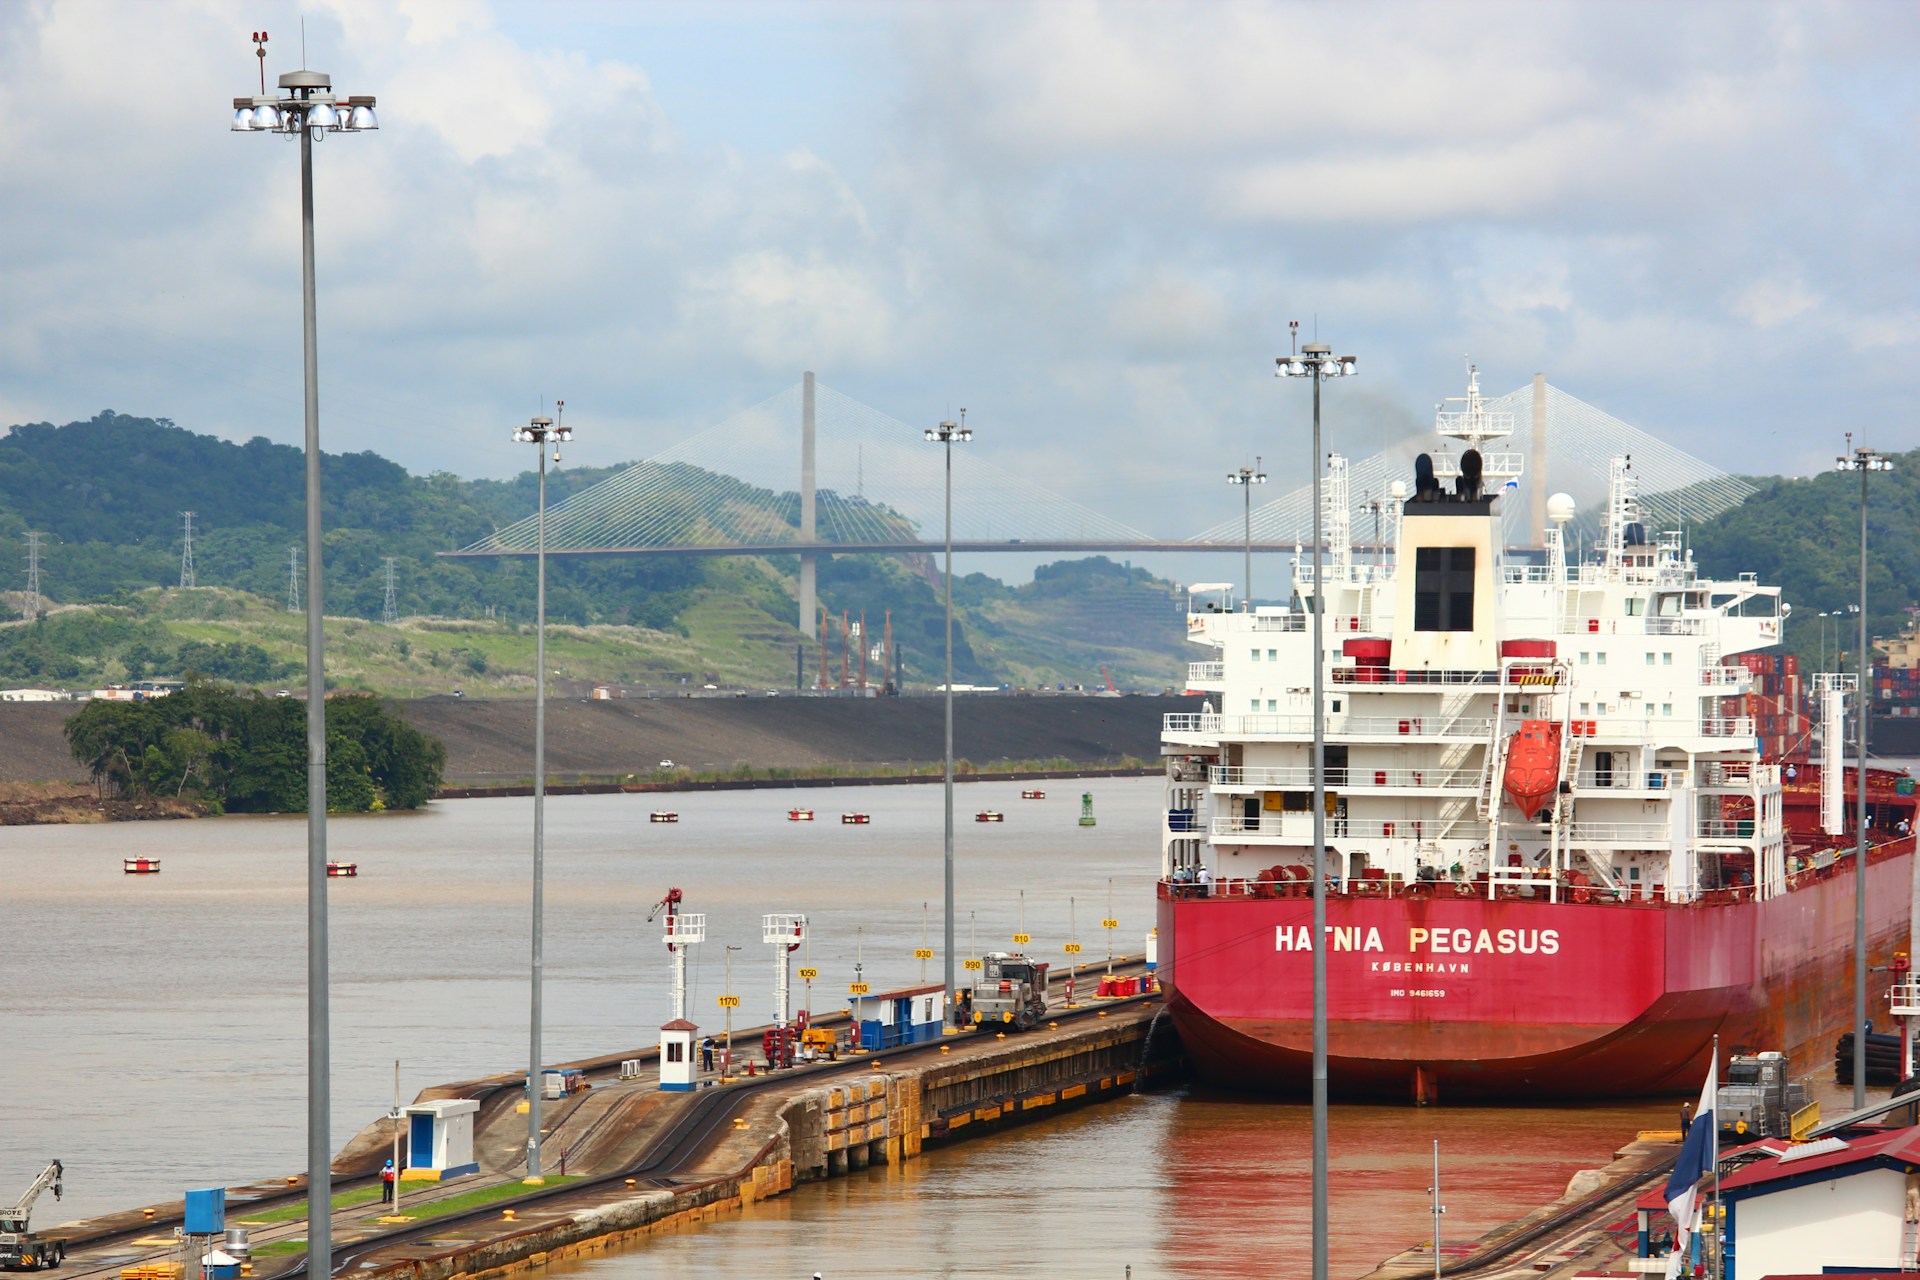 Impact of Drought - Panama Canal Toll Revenue Faces Decline